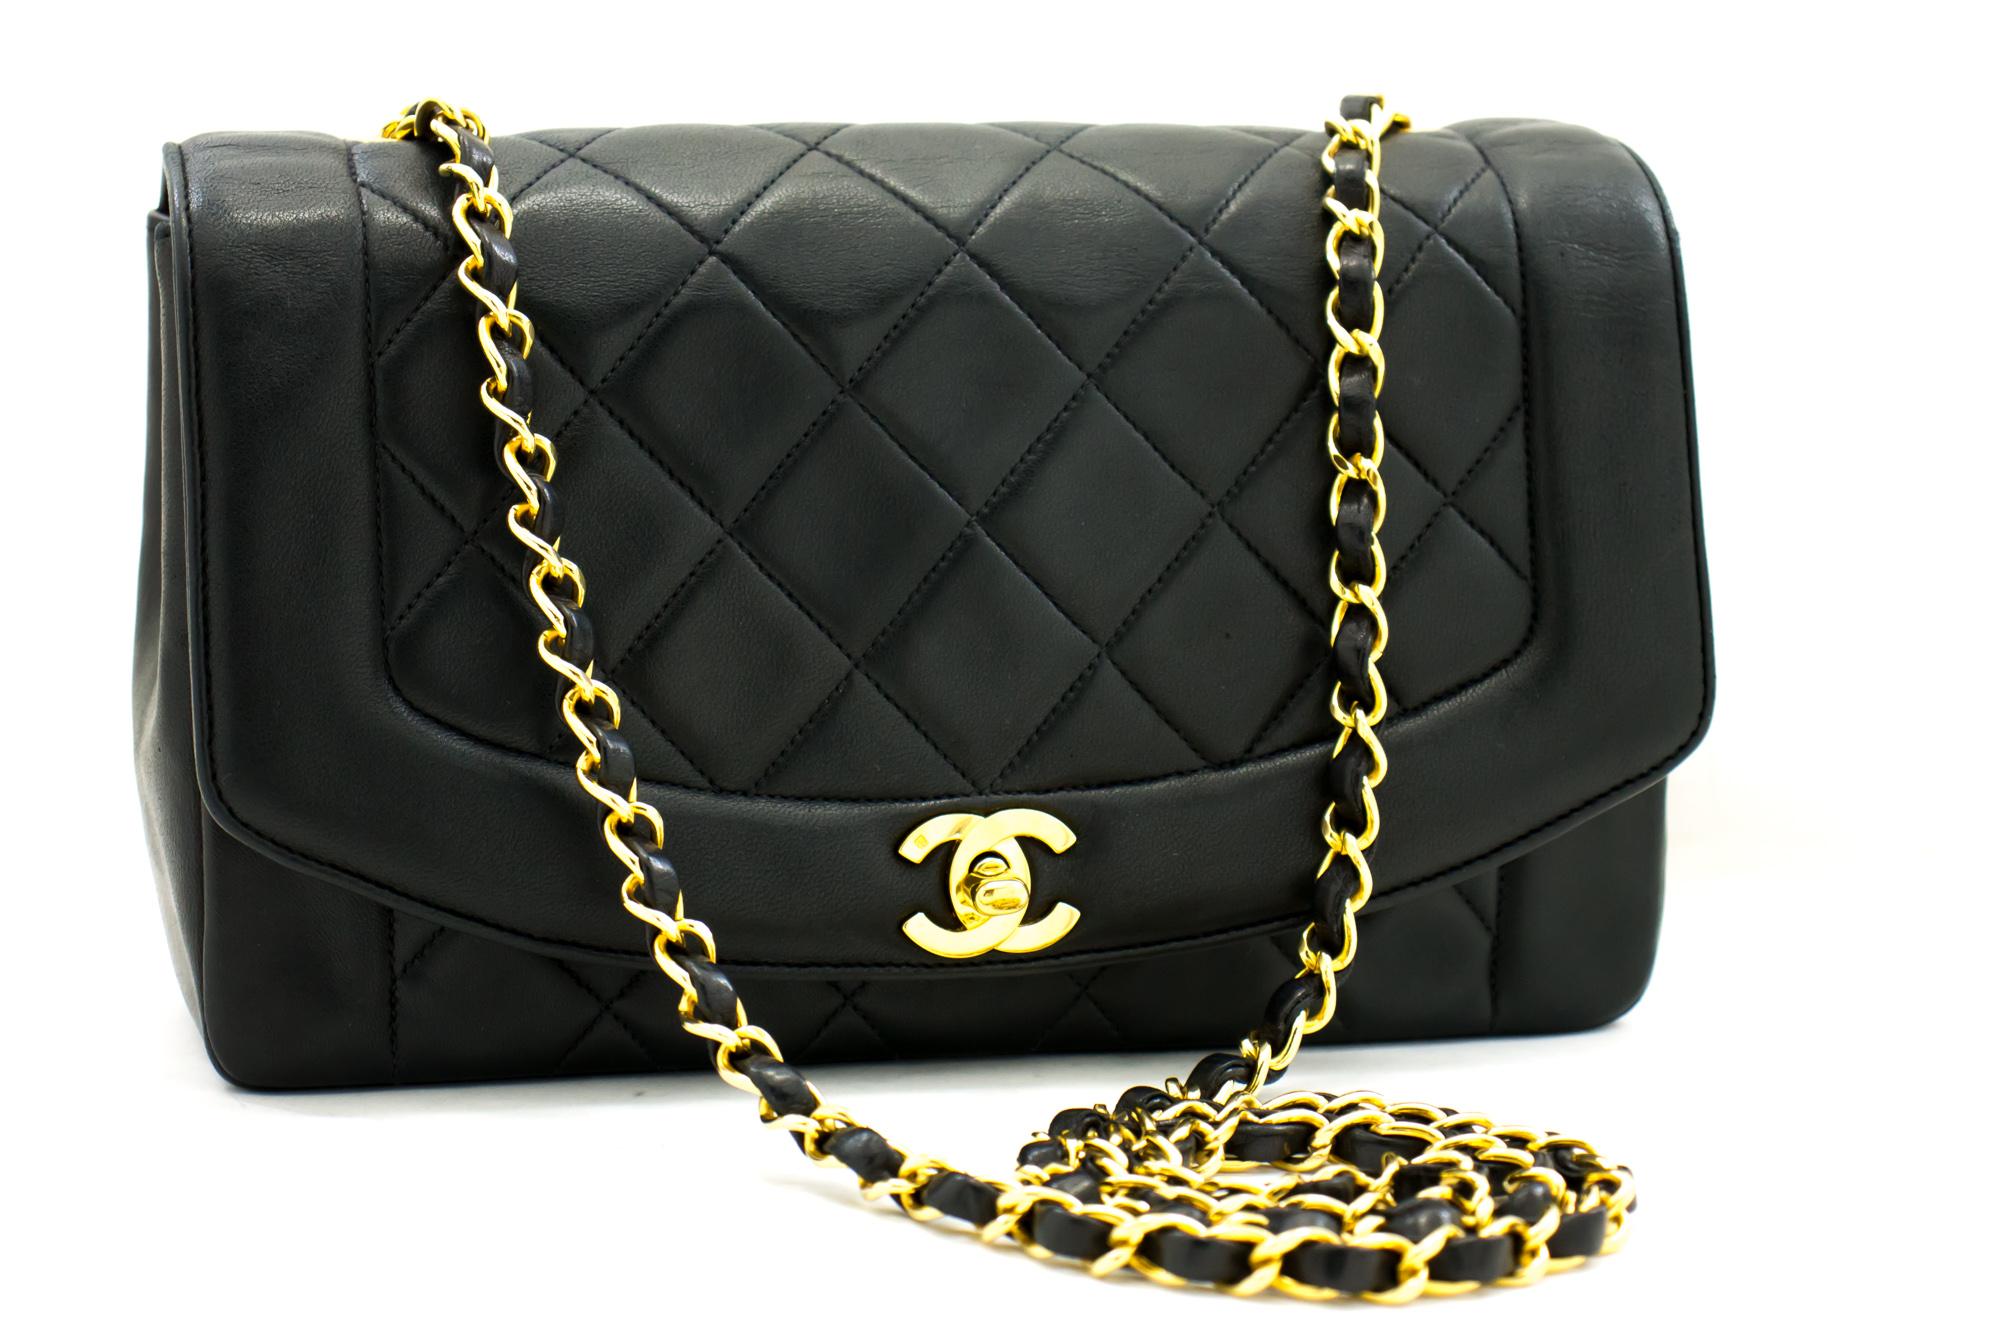 An authentic CHANEL Diana Flap Chain Shoulder Bag Crossbody Black Quilted Lamb. The color is Black. The outside material is Leather. The pattern is Solid. This item is Vintage / Classic. The year of manufacture would be 1991-1994.
Conditions &